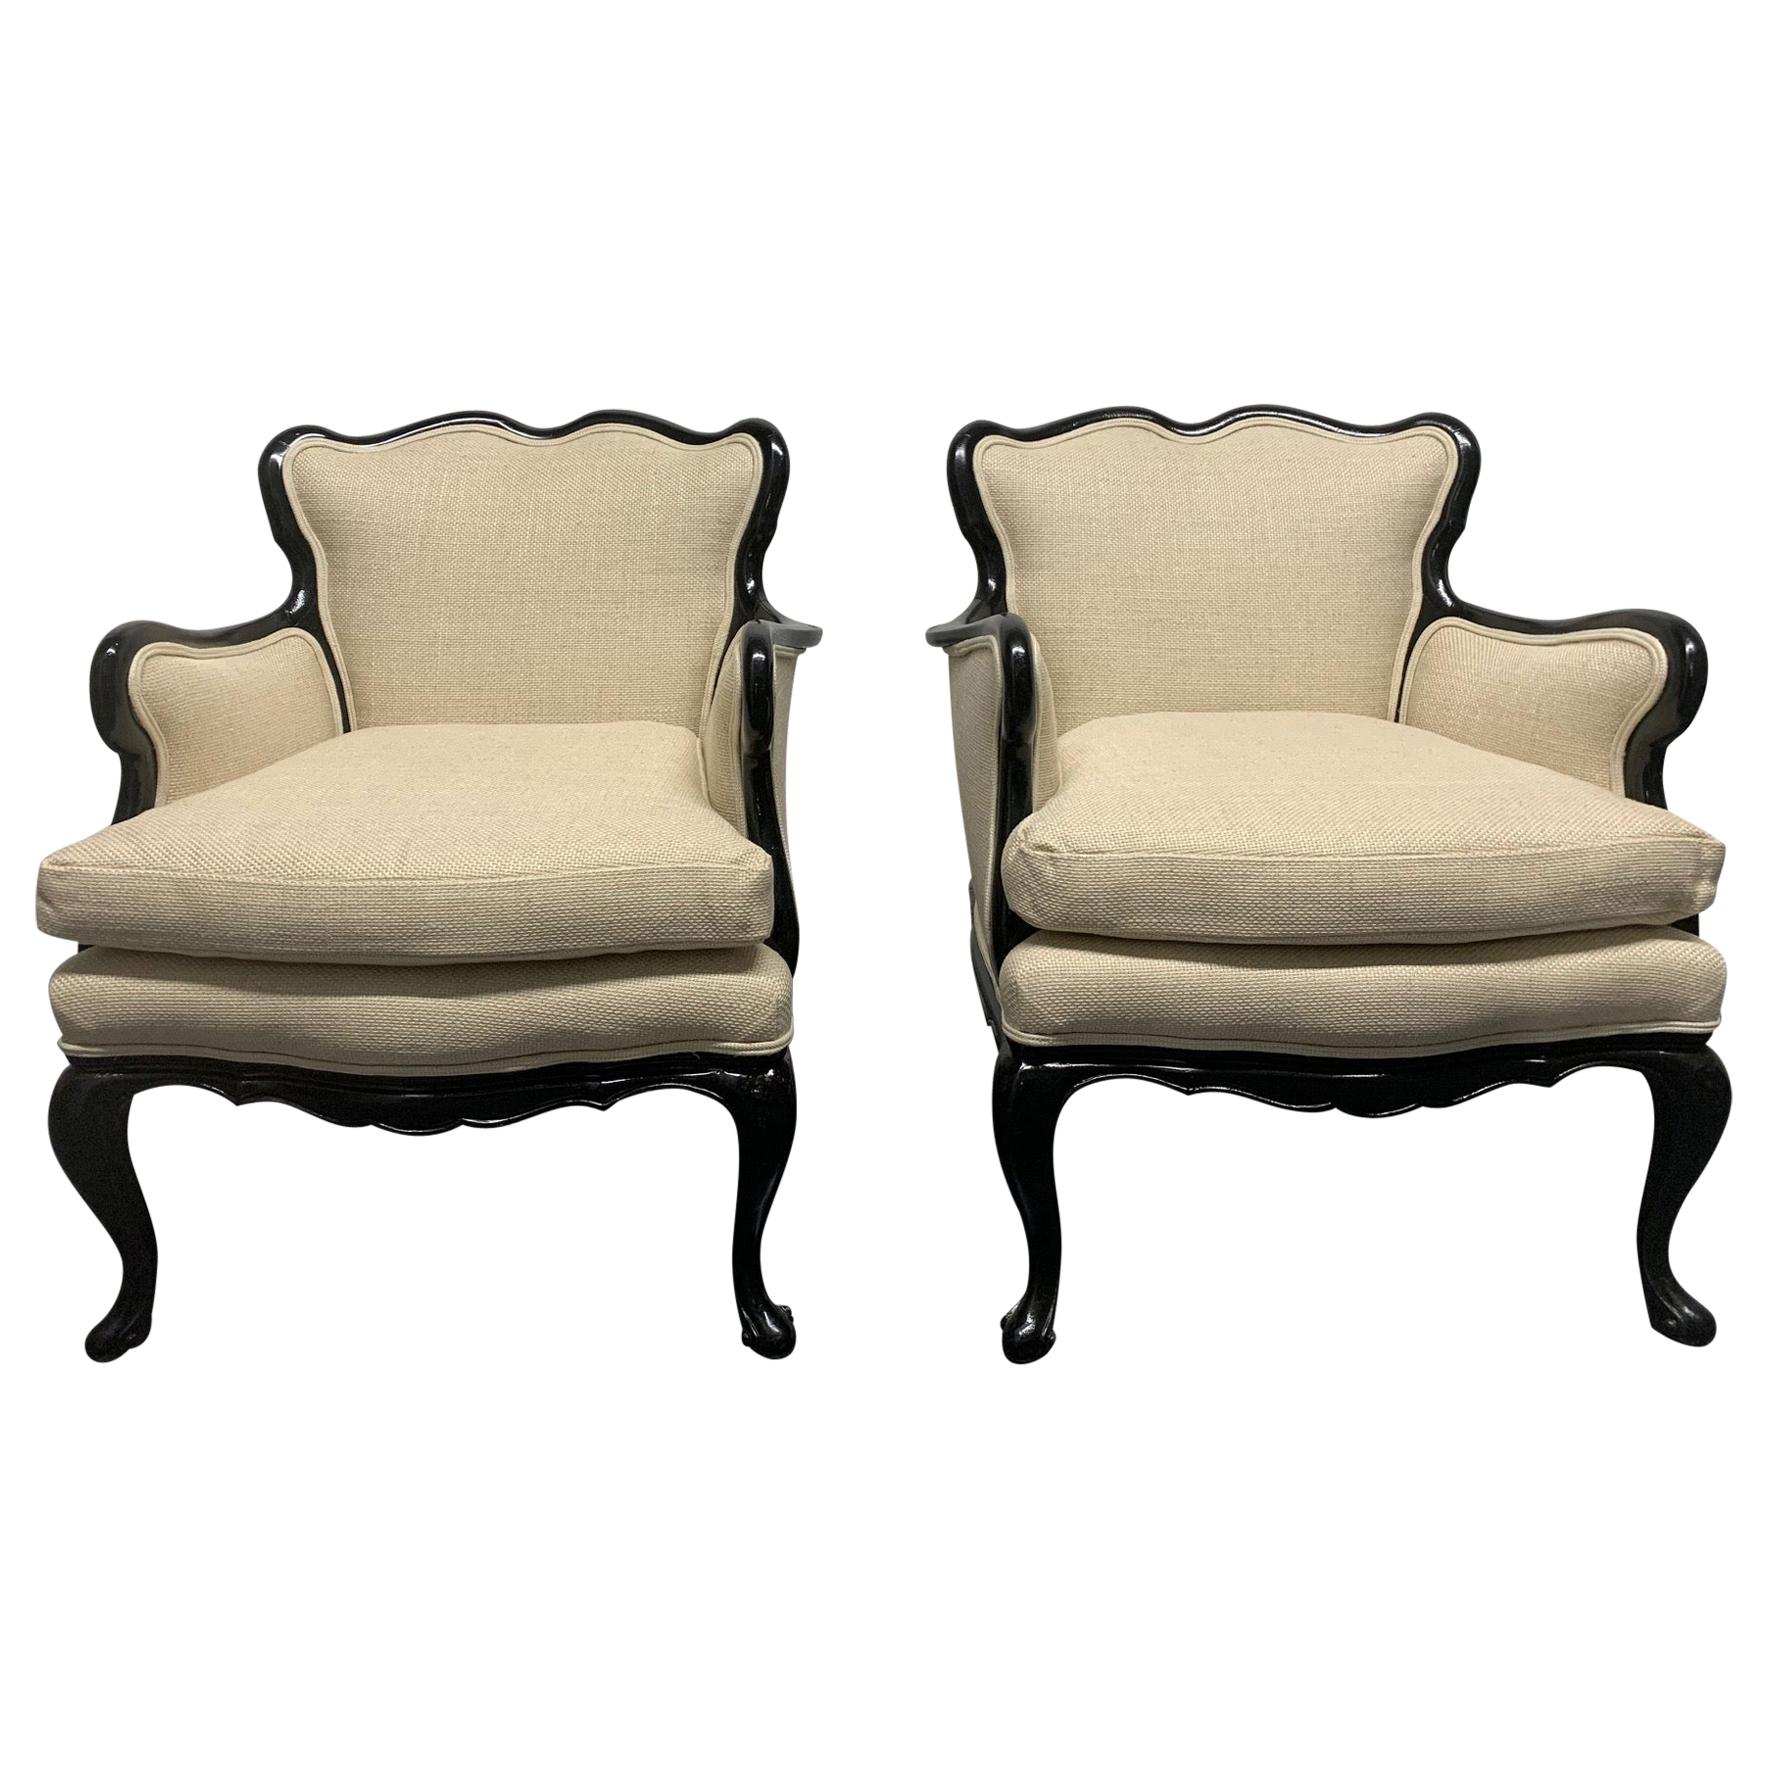 Pair of French Antique Style Lounge Chairs in Linen